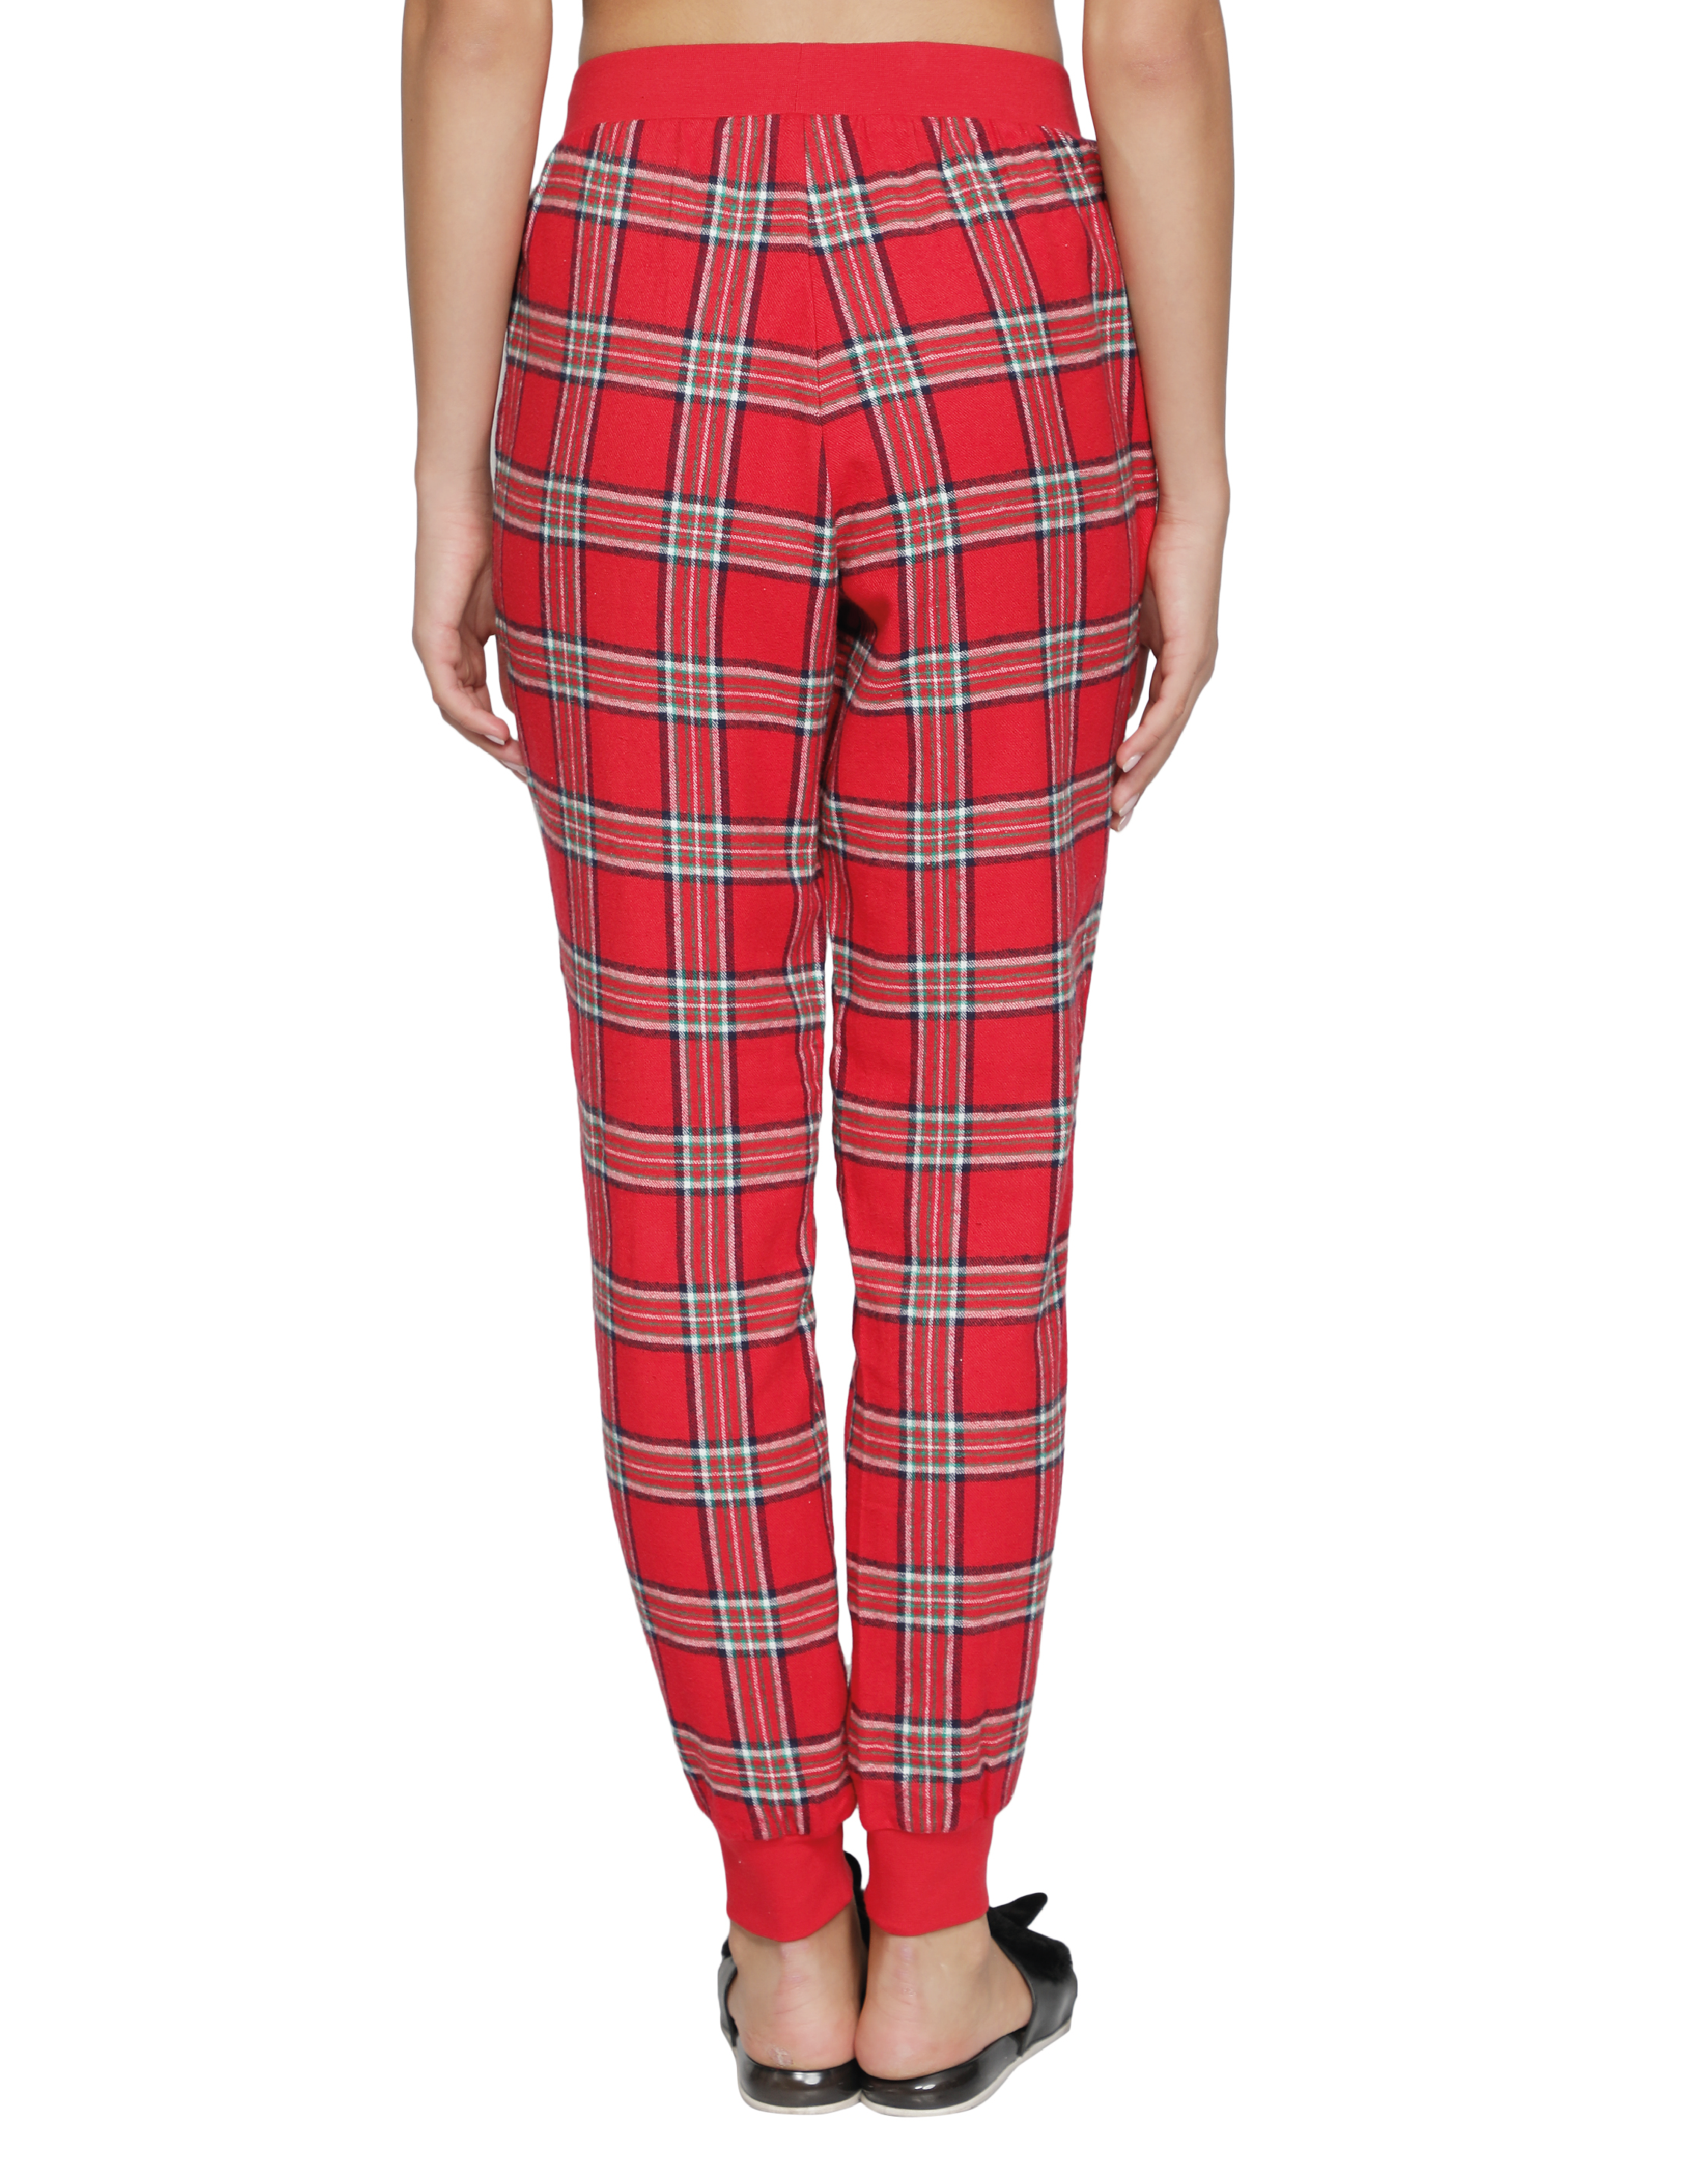 MOLERFO Plaid Pants for Women Goth Pants Alt Pants Baggy Pants for Women  Alt Clothing Alternative Clothing (Red,Large) at Amazon Women's Clothing  store